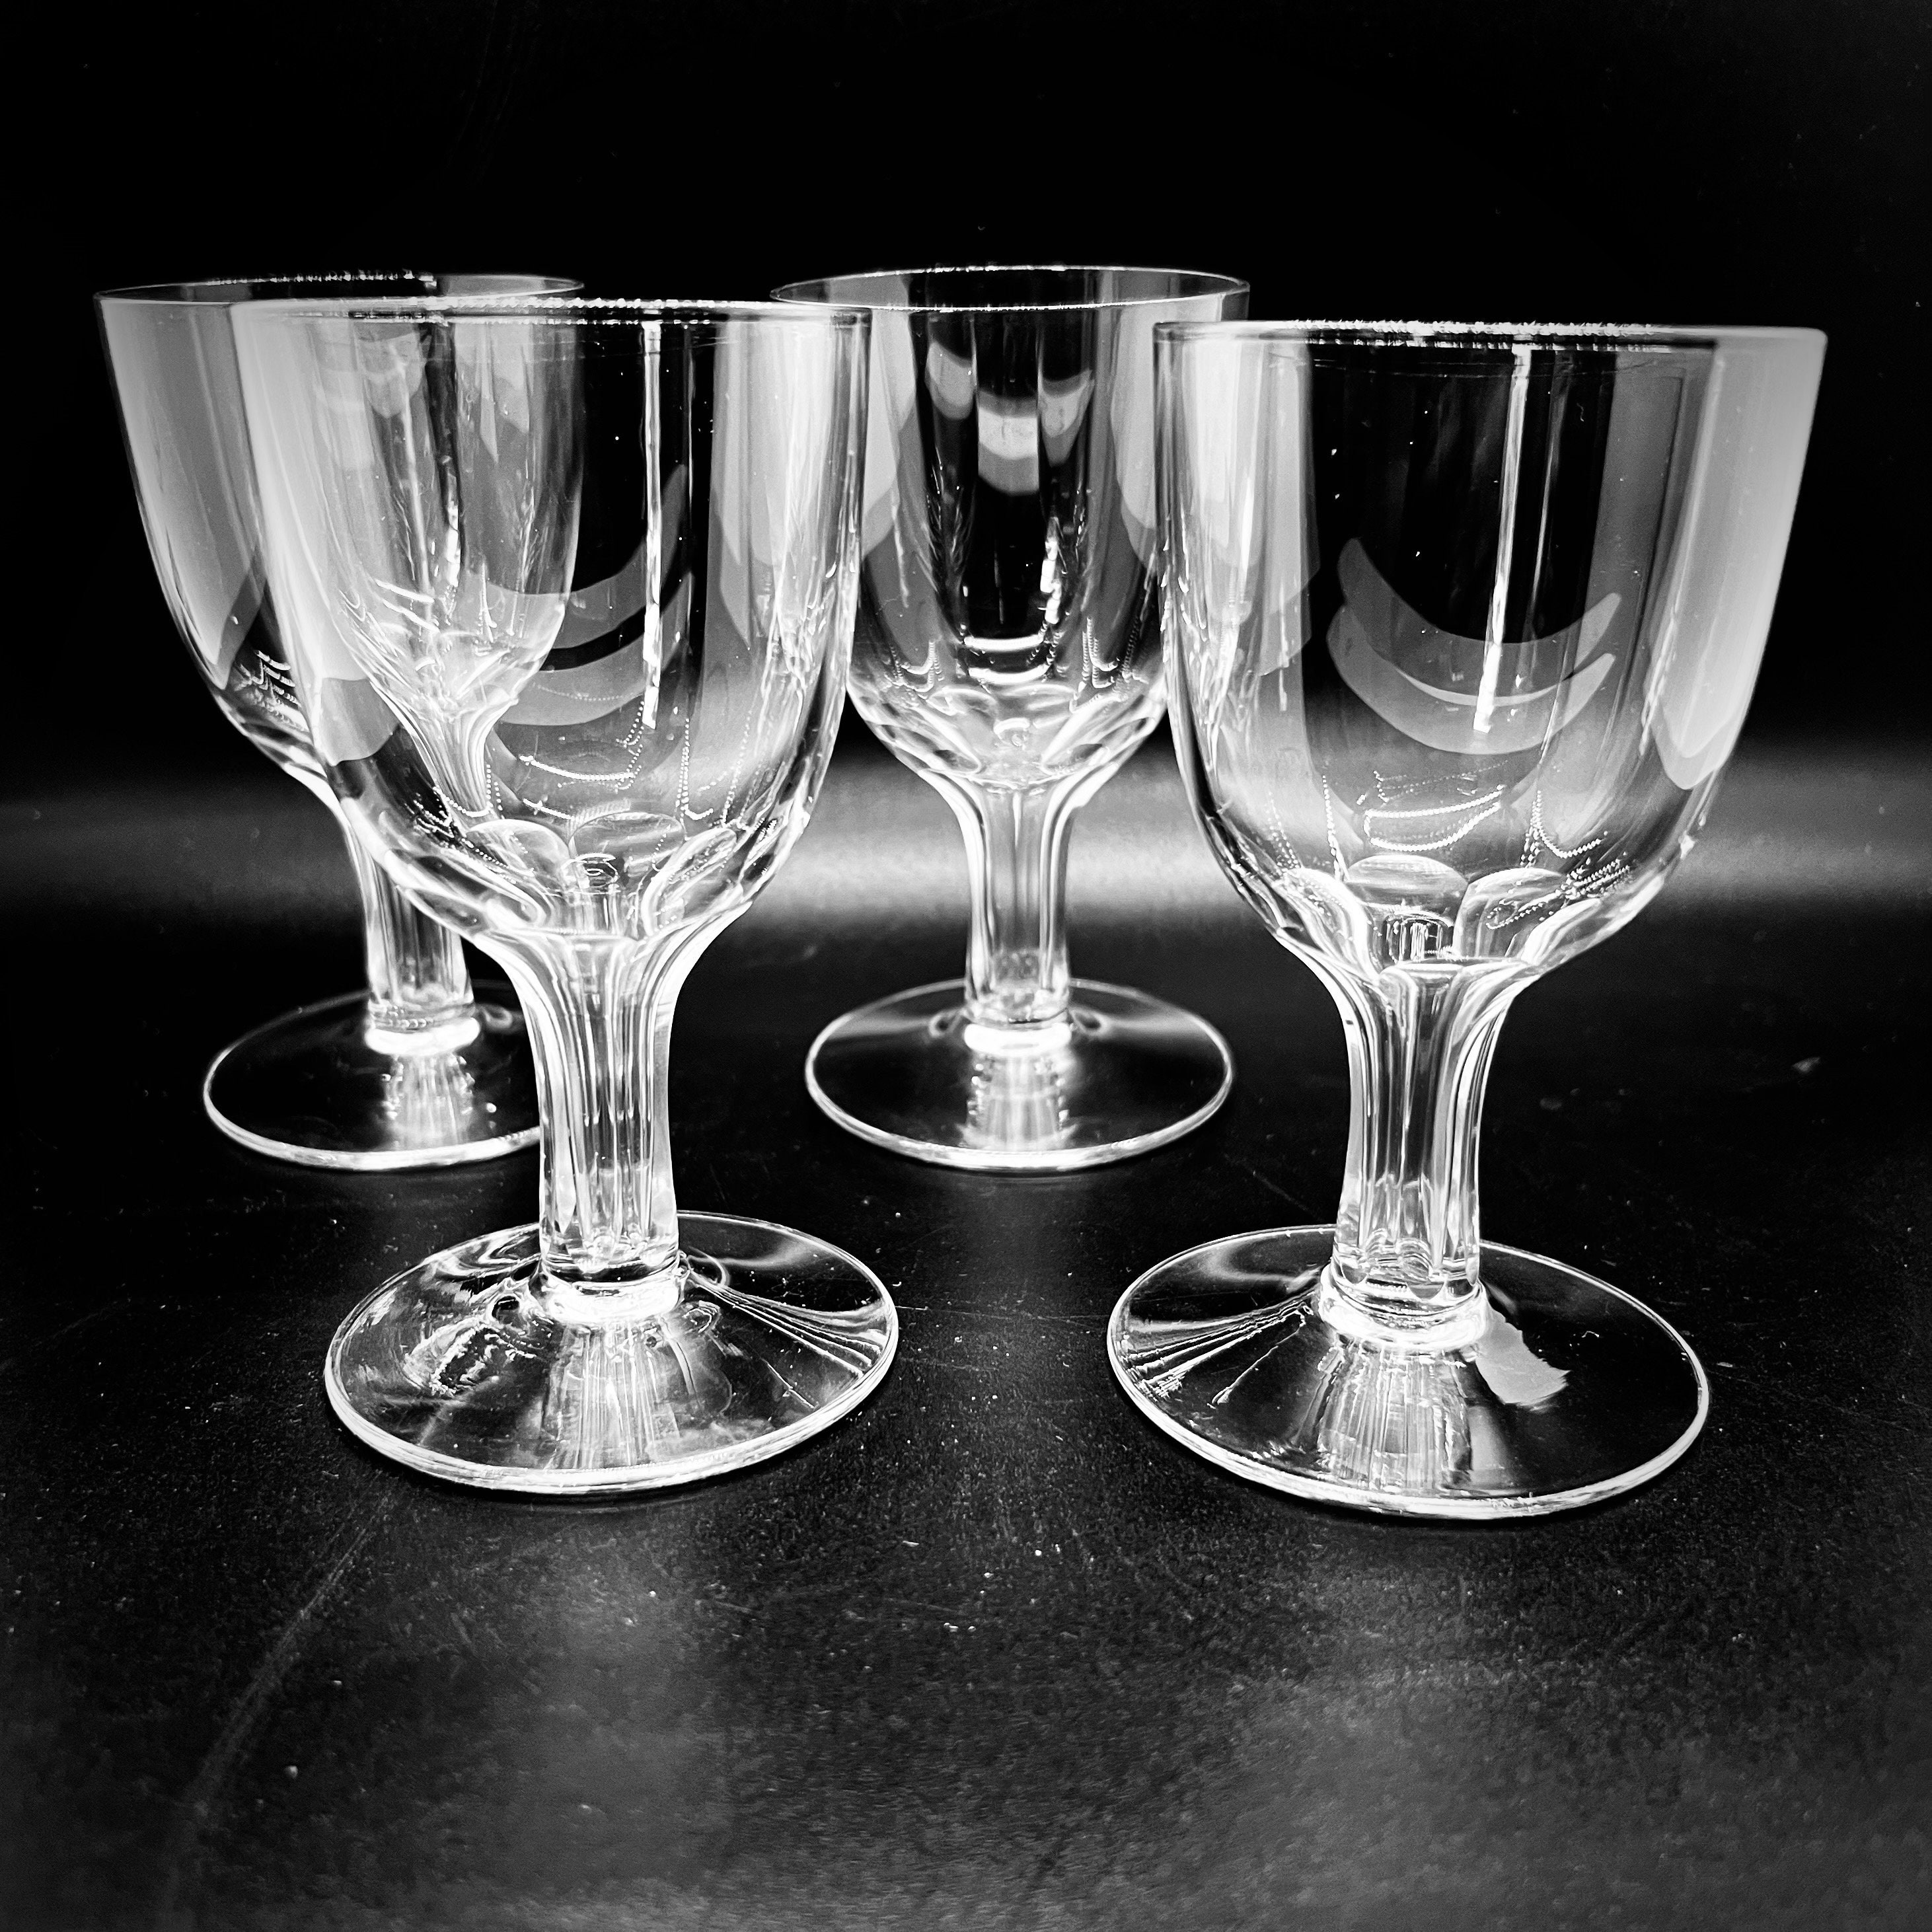 Set of 7 Magnificent Swedish Champagne Hollow Stem Glasses KOSTA BODA Thin  Stem, Cut Foot Absolutely Superb 